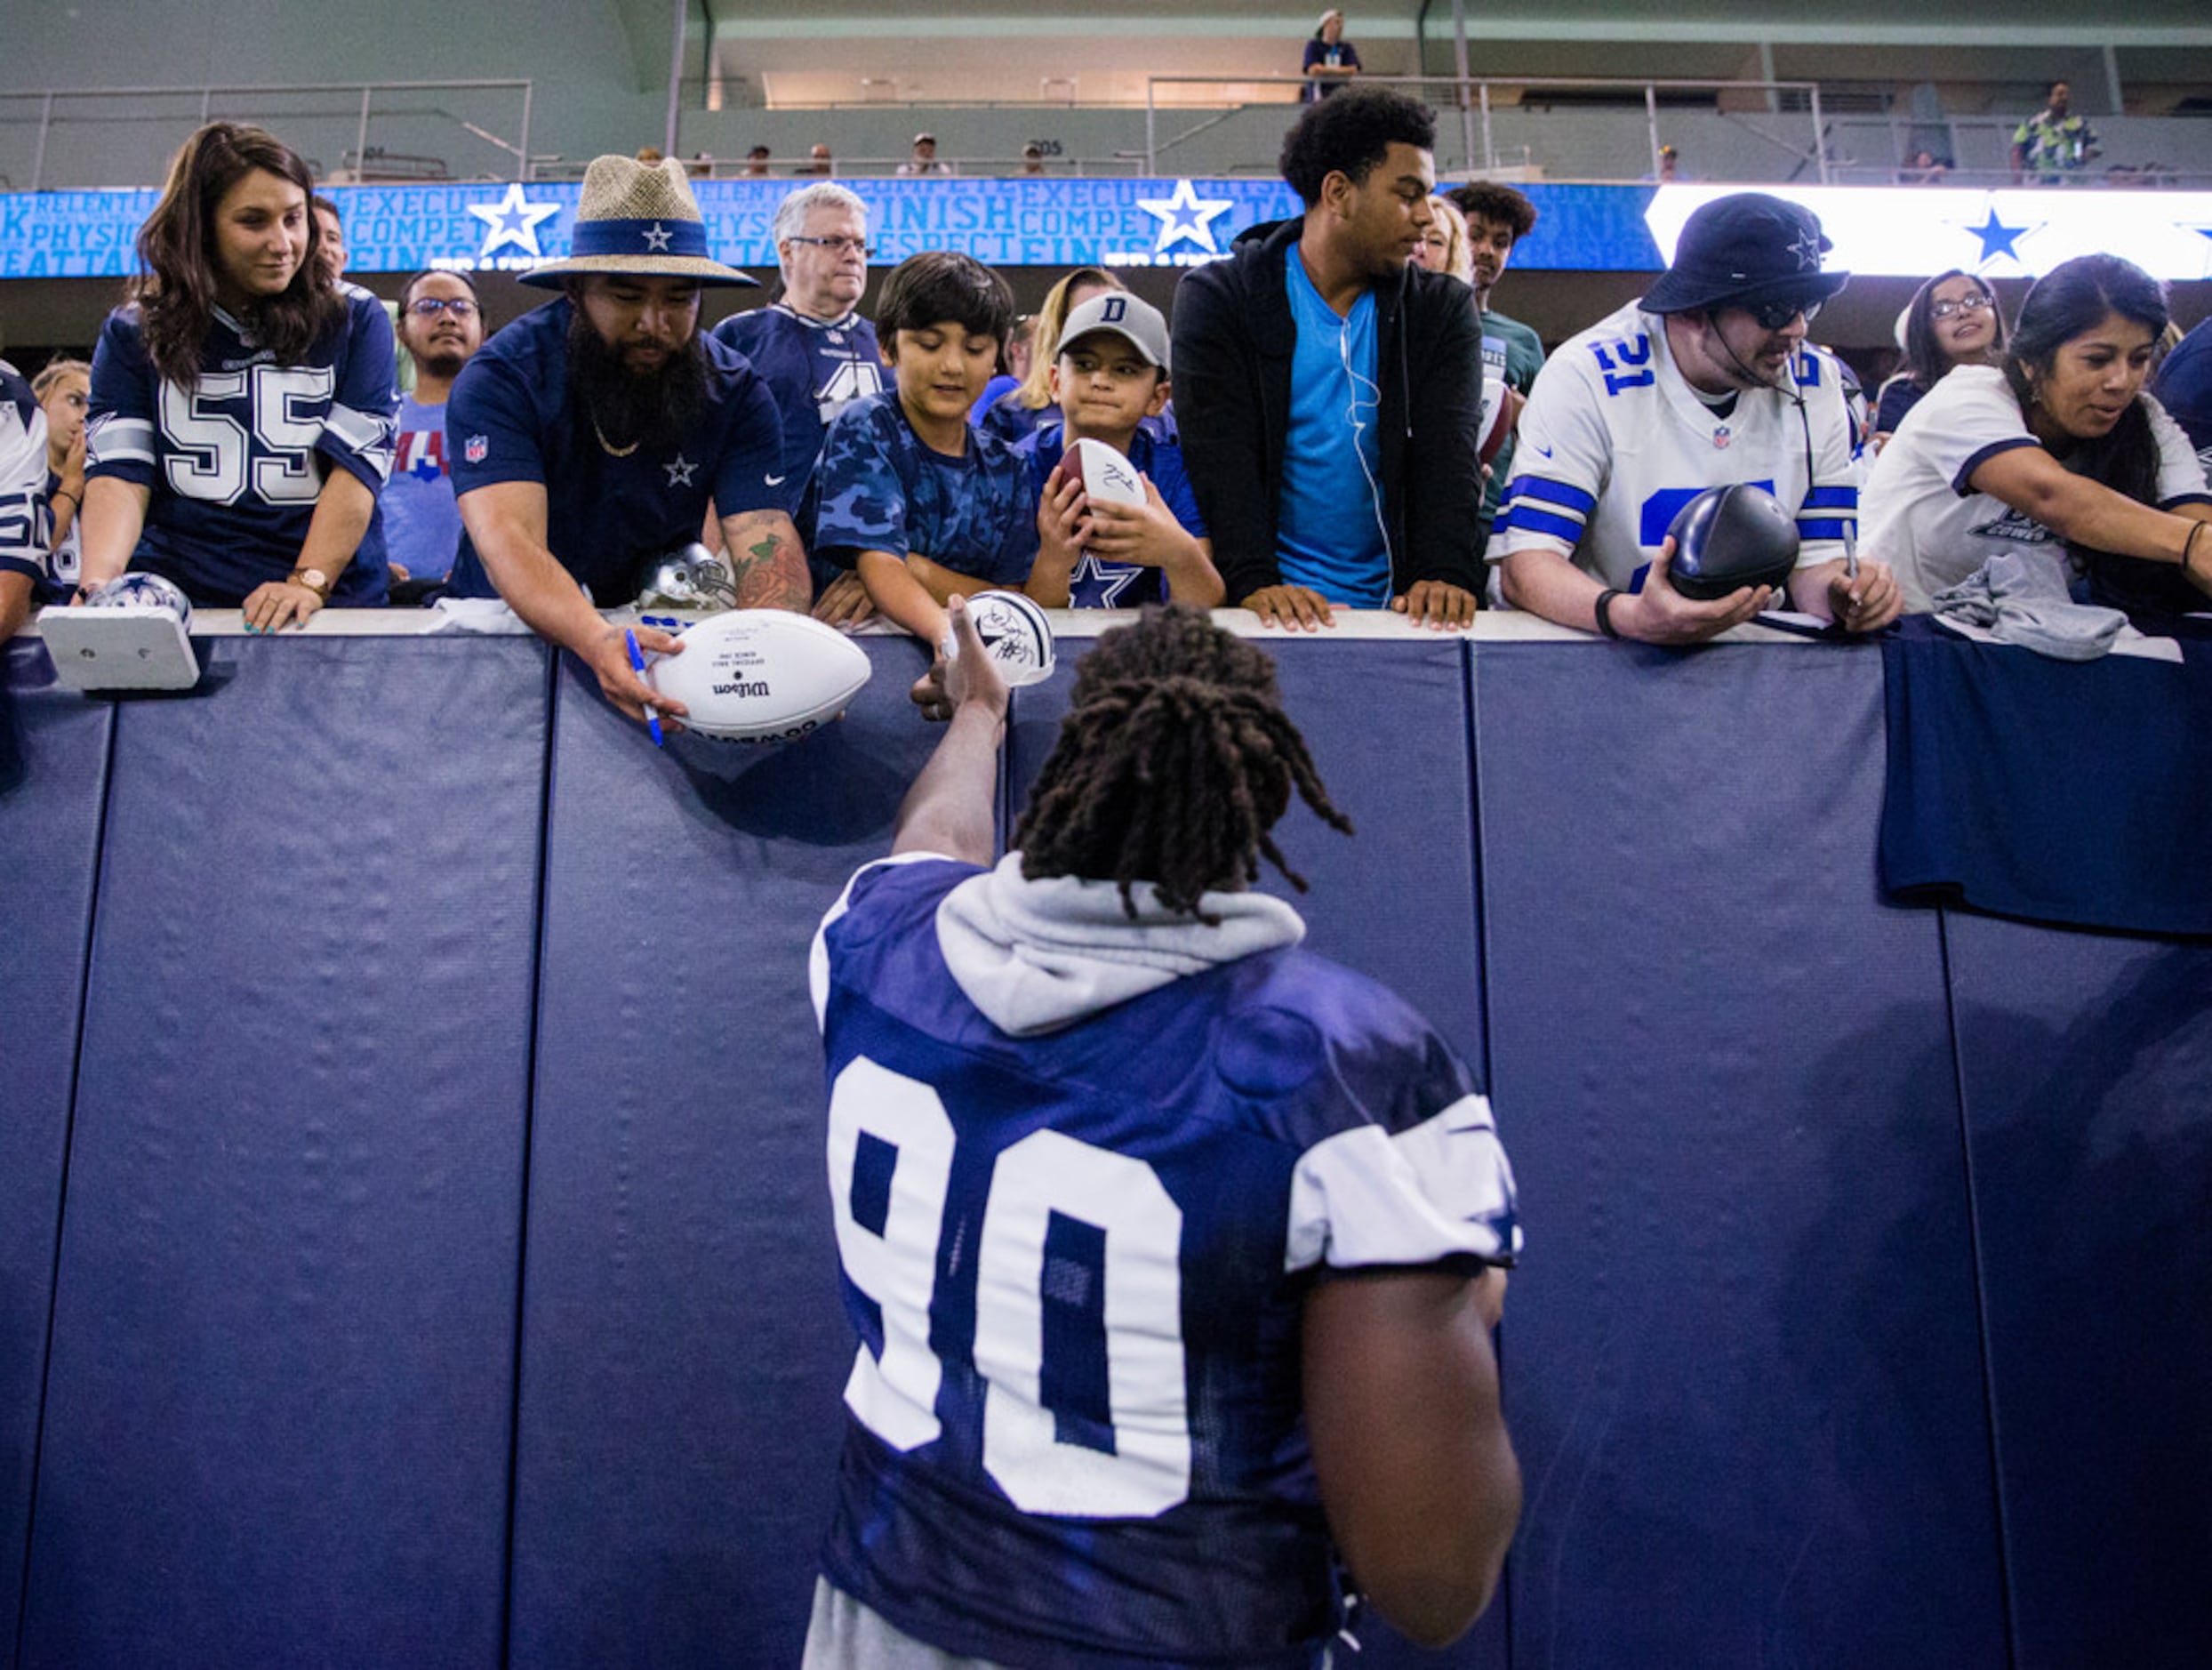 While spending time with local kids, DeMarcus Lawrence expresses regret for viral interaction with young fan